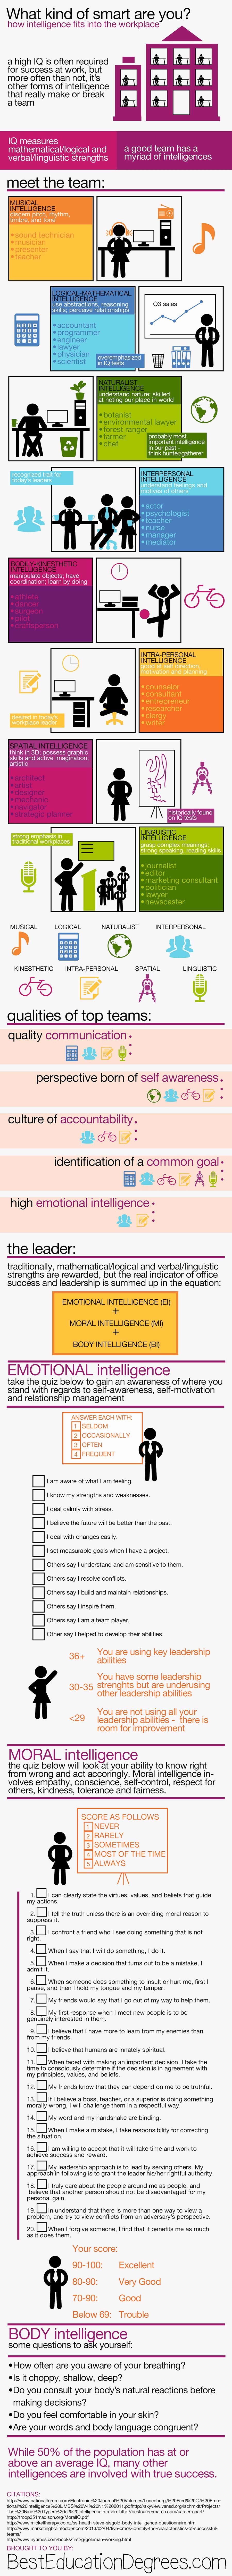 What Kind of Smart Are You? [Infographic]